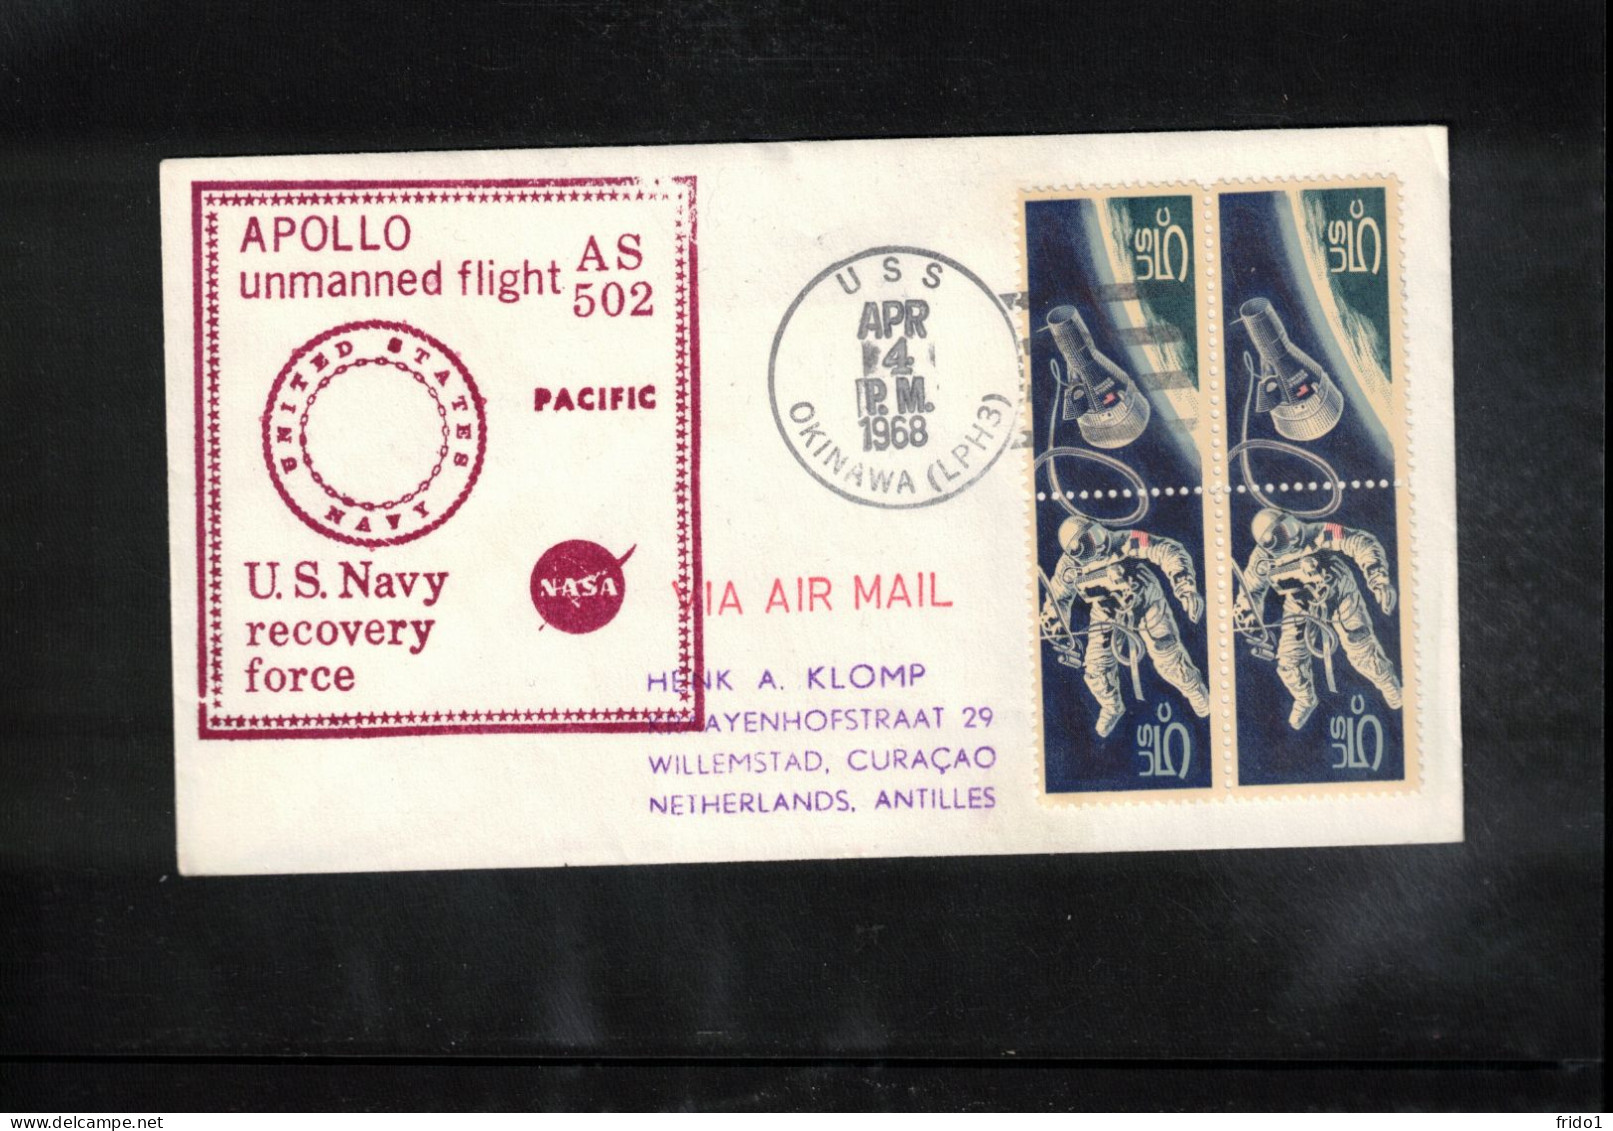 USA 1968 Space / Weltraum Apollo Unmanned Flight AS 502 - US Navy Recovery Force Ship USS Okinawa Interesting Cover - United States